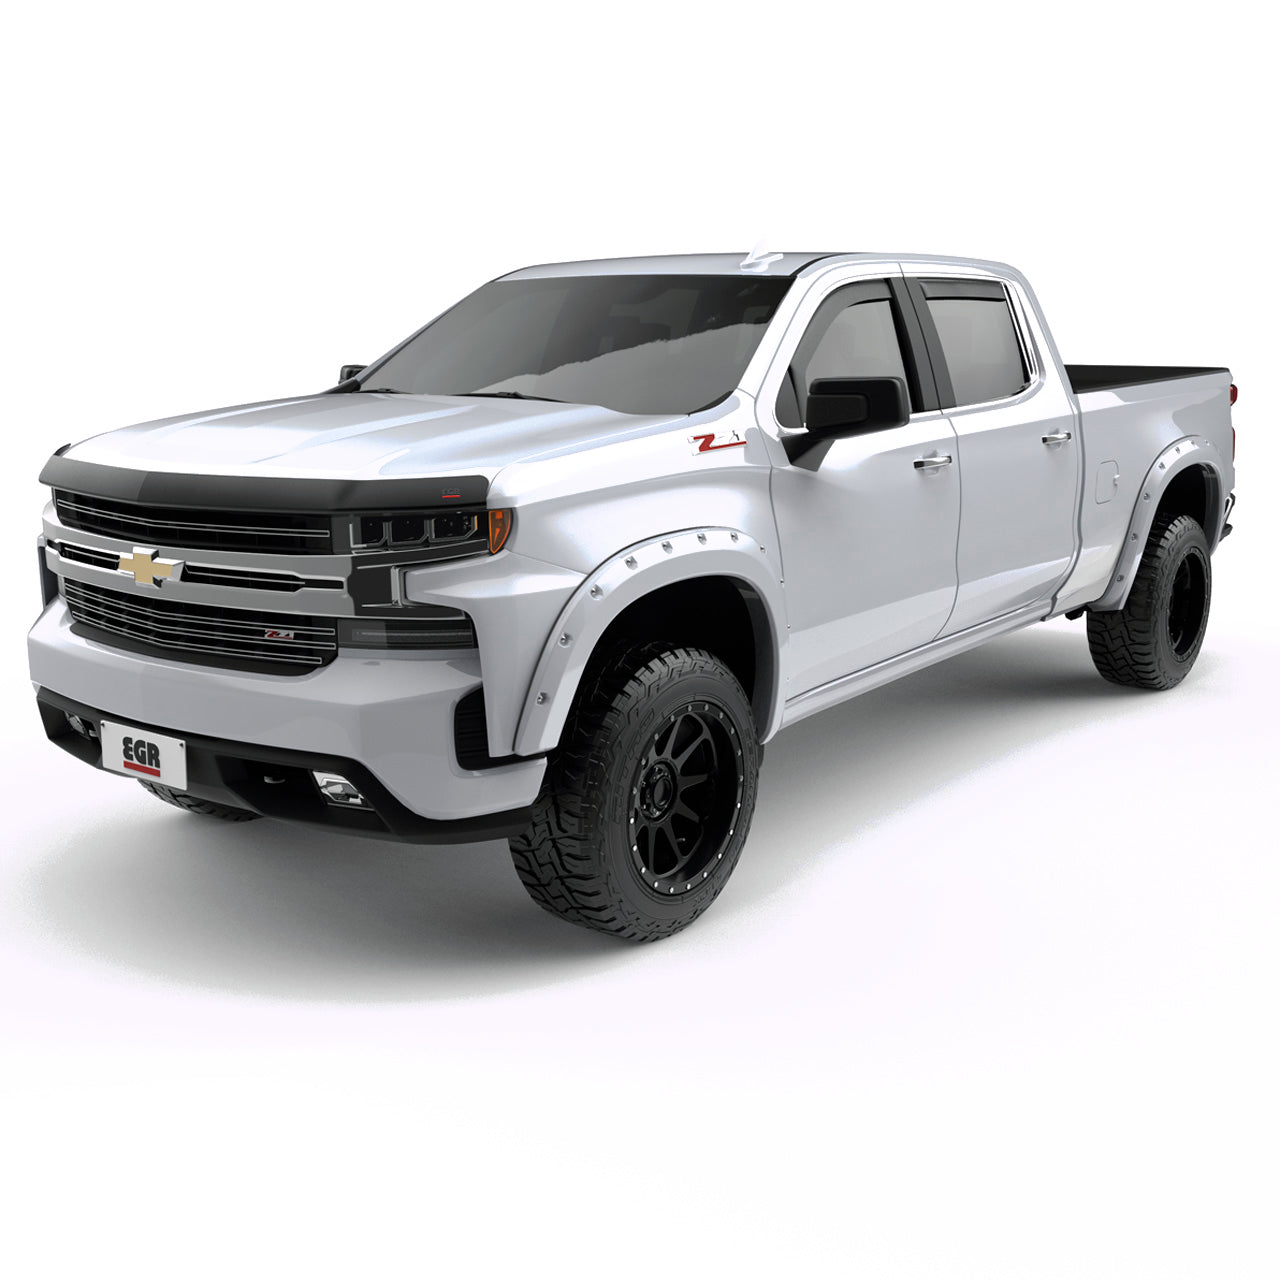 EGR Traditional Bolt-on look Fender Flares - 19-22 Chevrolet Silverado 1500 Painted to Code Summit White set of 4